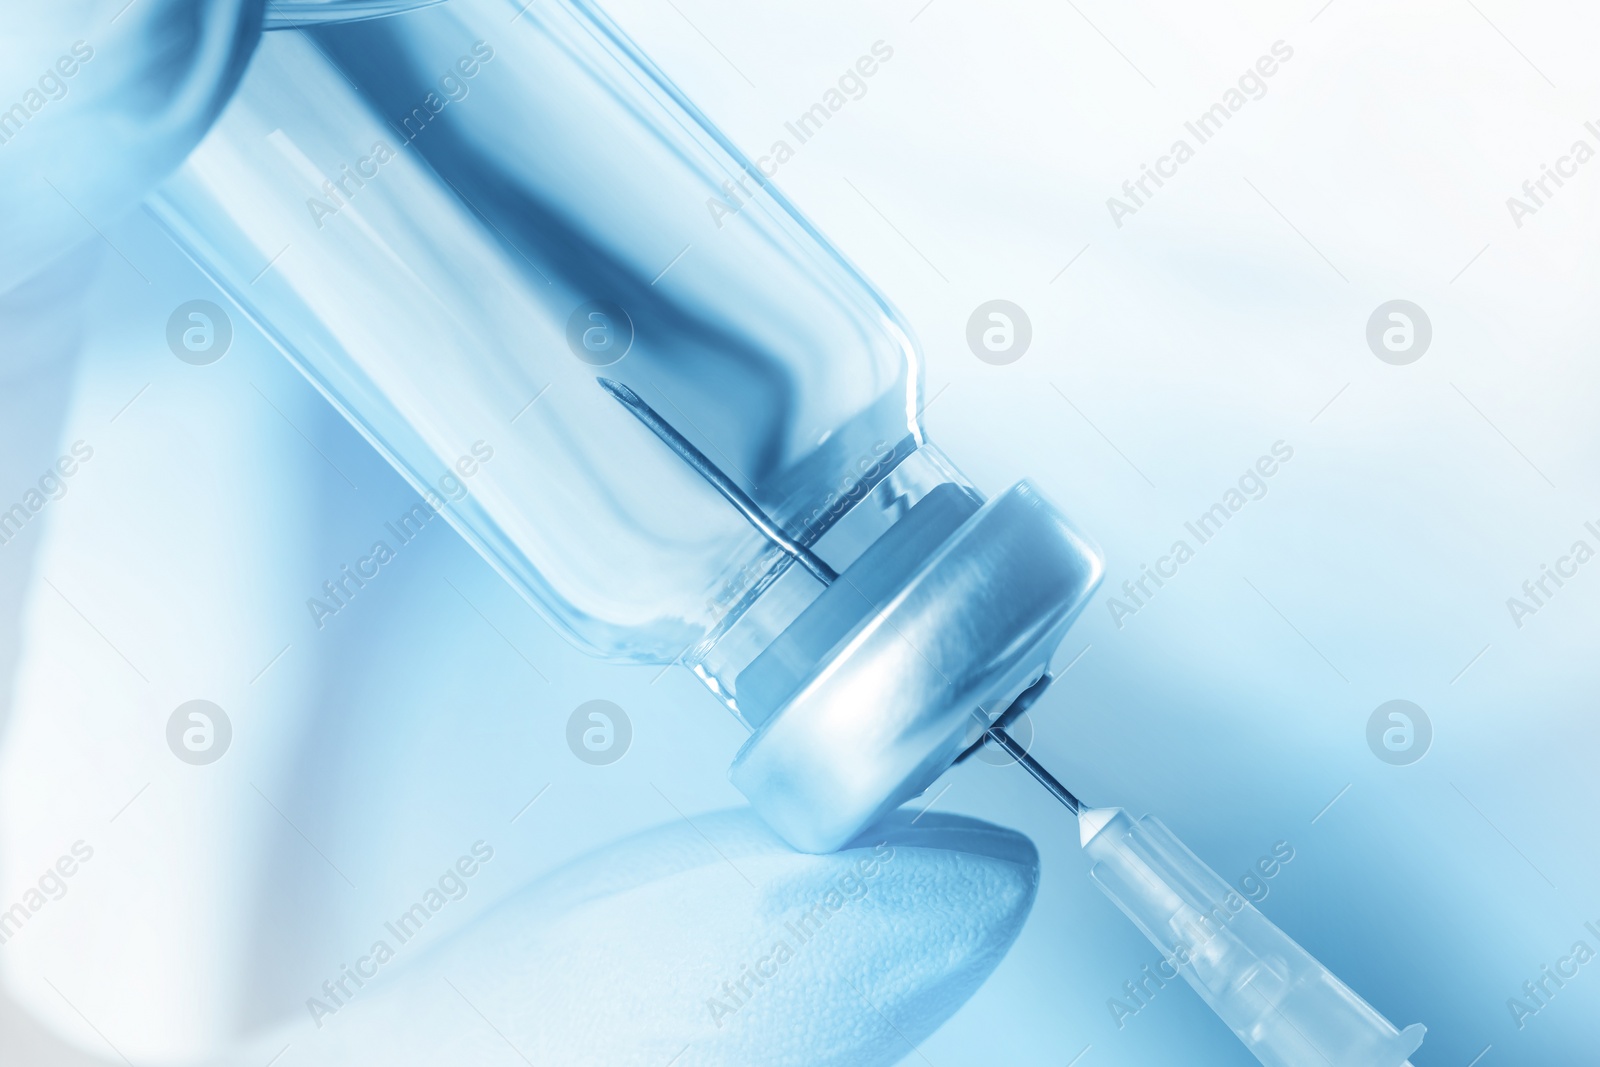 Image of Doctor filling syringe with medication from vial, toned in light blue